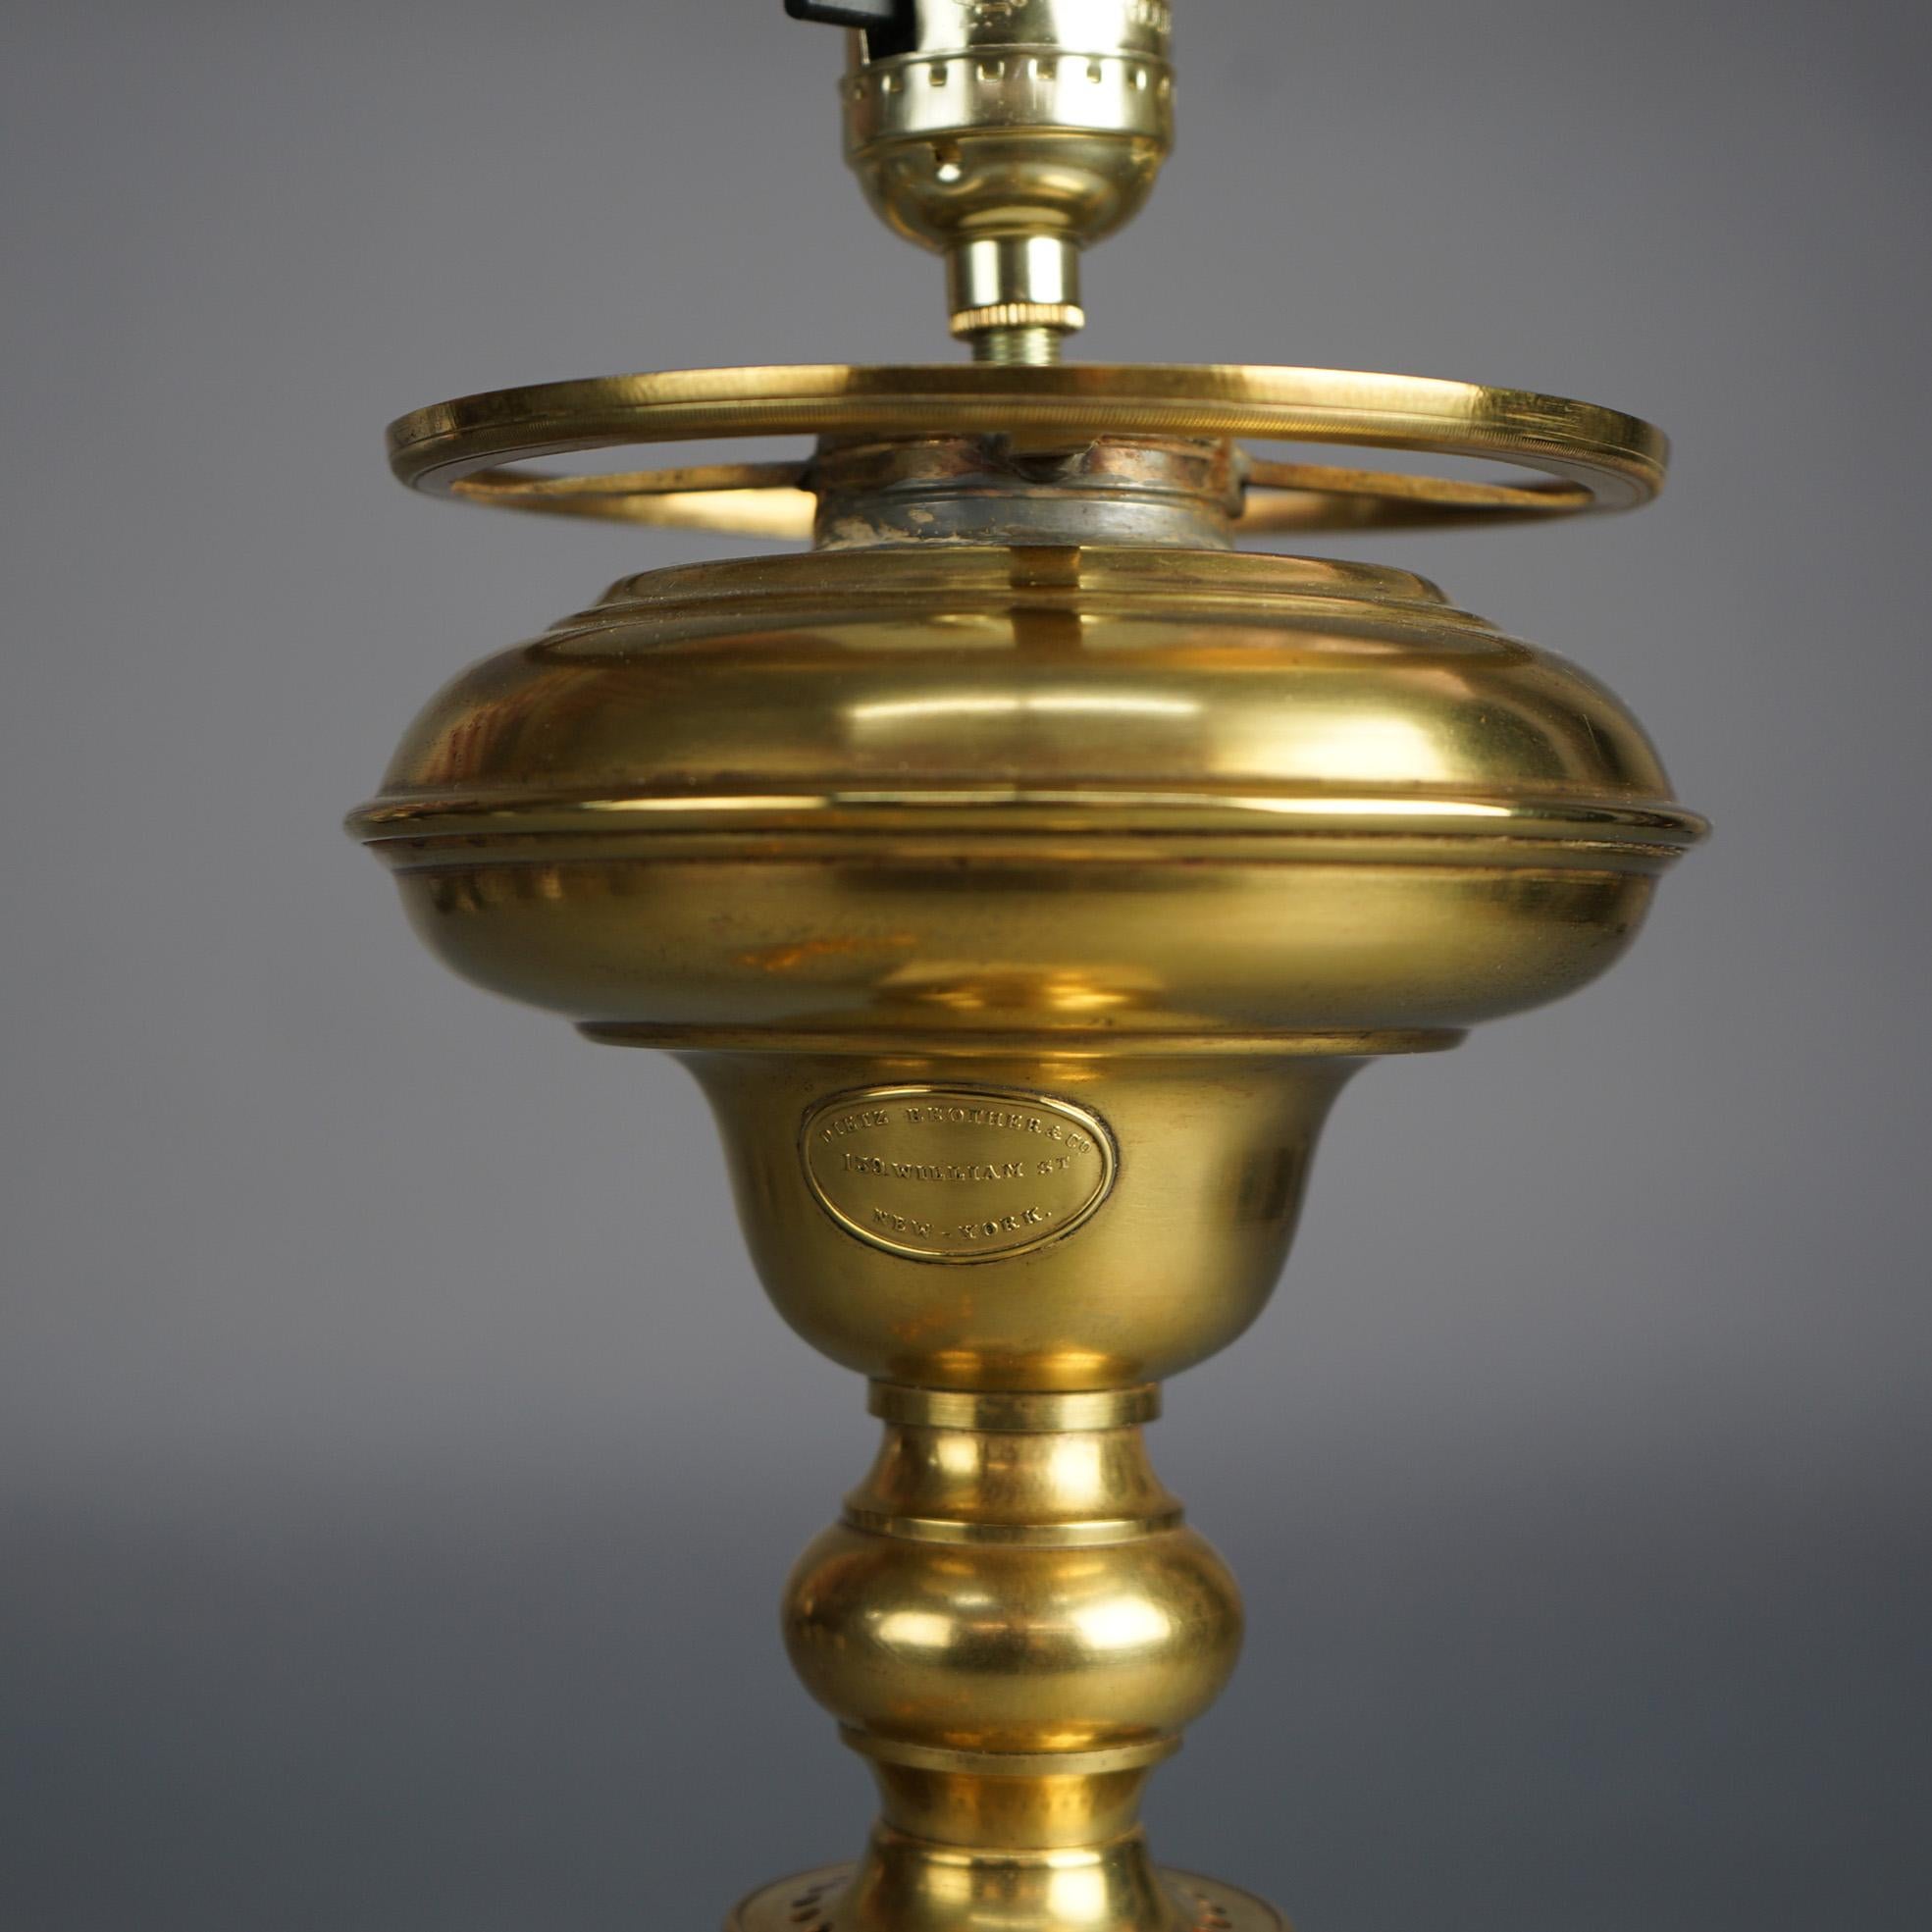 Antique Brass Solar Lamp with Tam-O-Shanter Cut Glass Shade & Marble Base C1840 For Sale 6